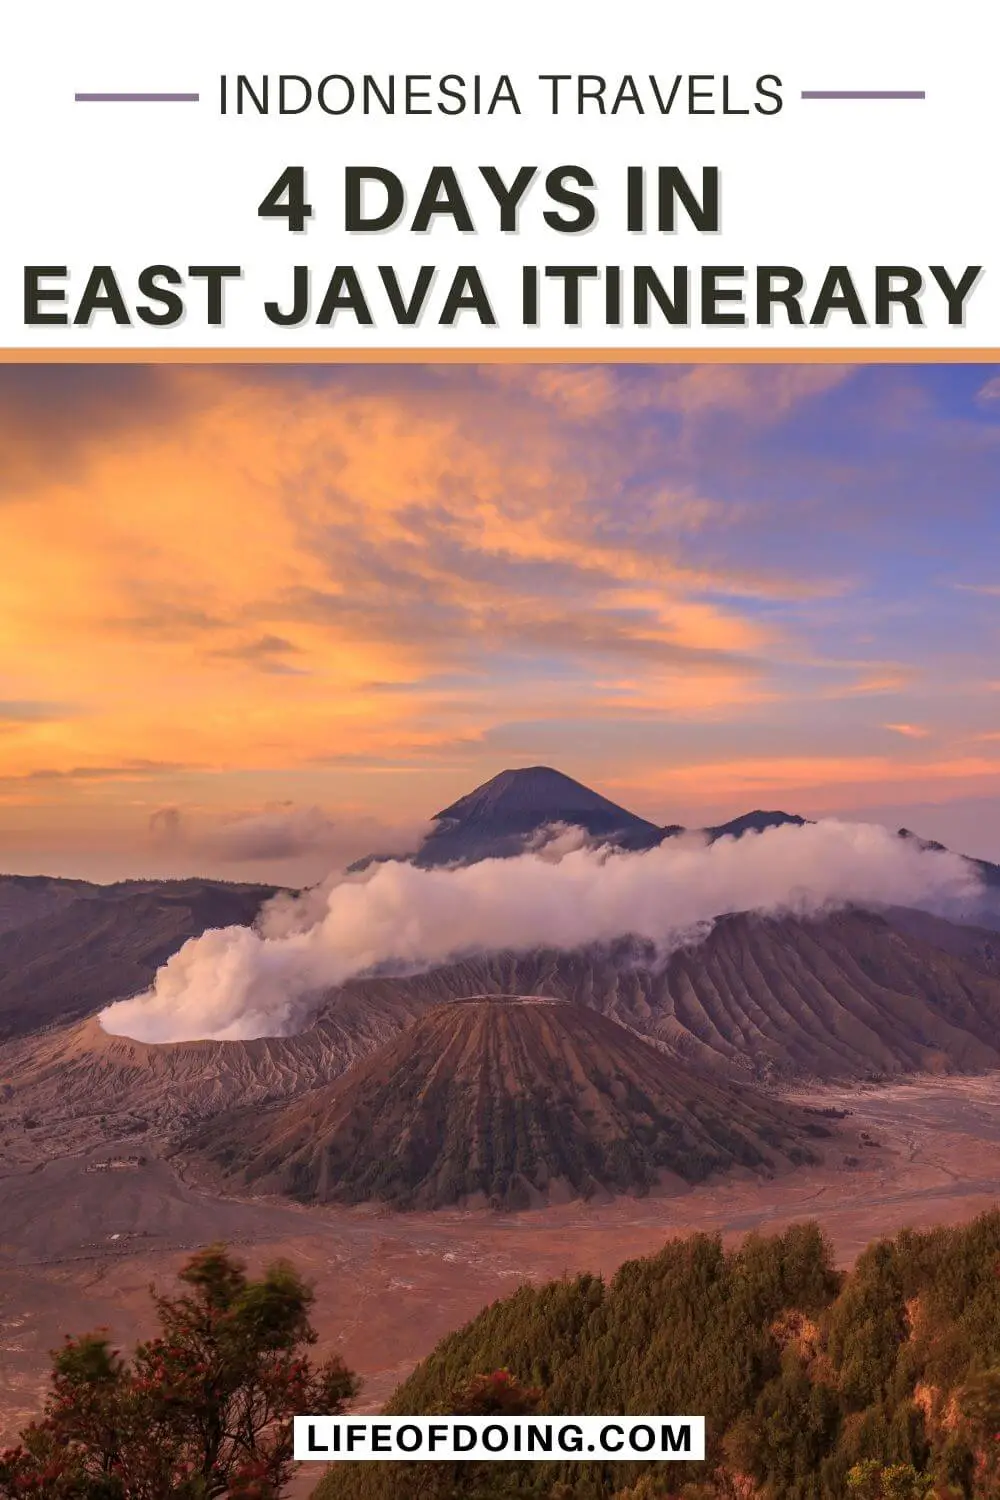 Purple and orange skies surround the Mount Bromo crater in East Java, Indonesia